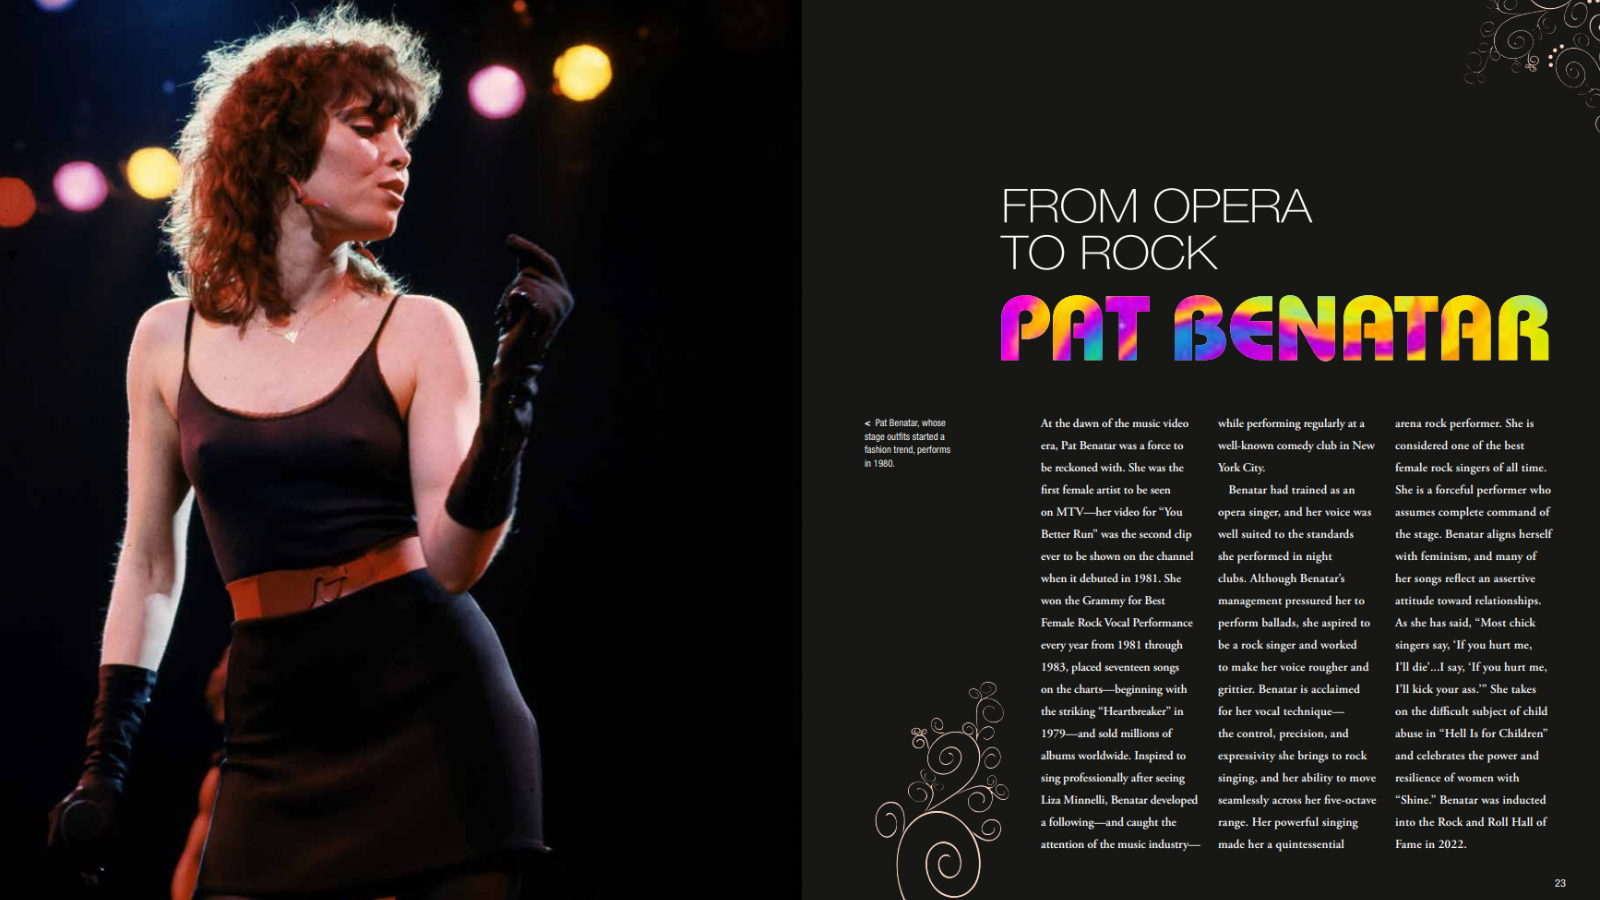 book spread with a picture of Pat Benatar and the opening text of her section